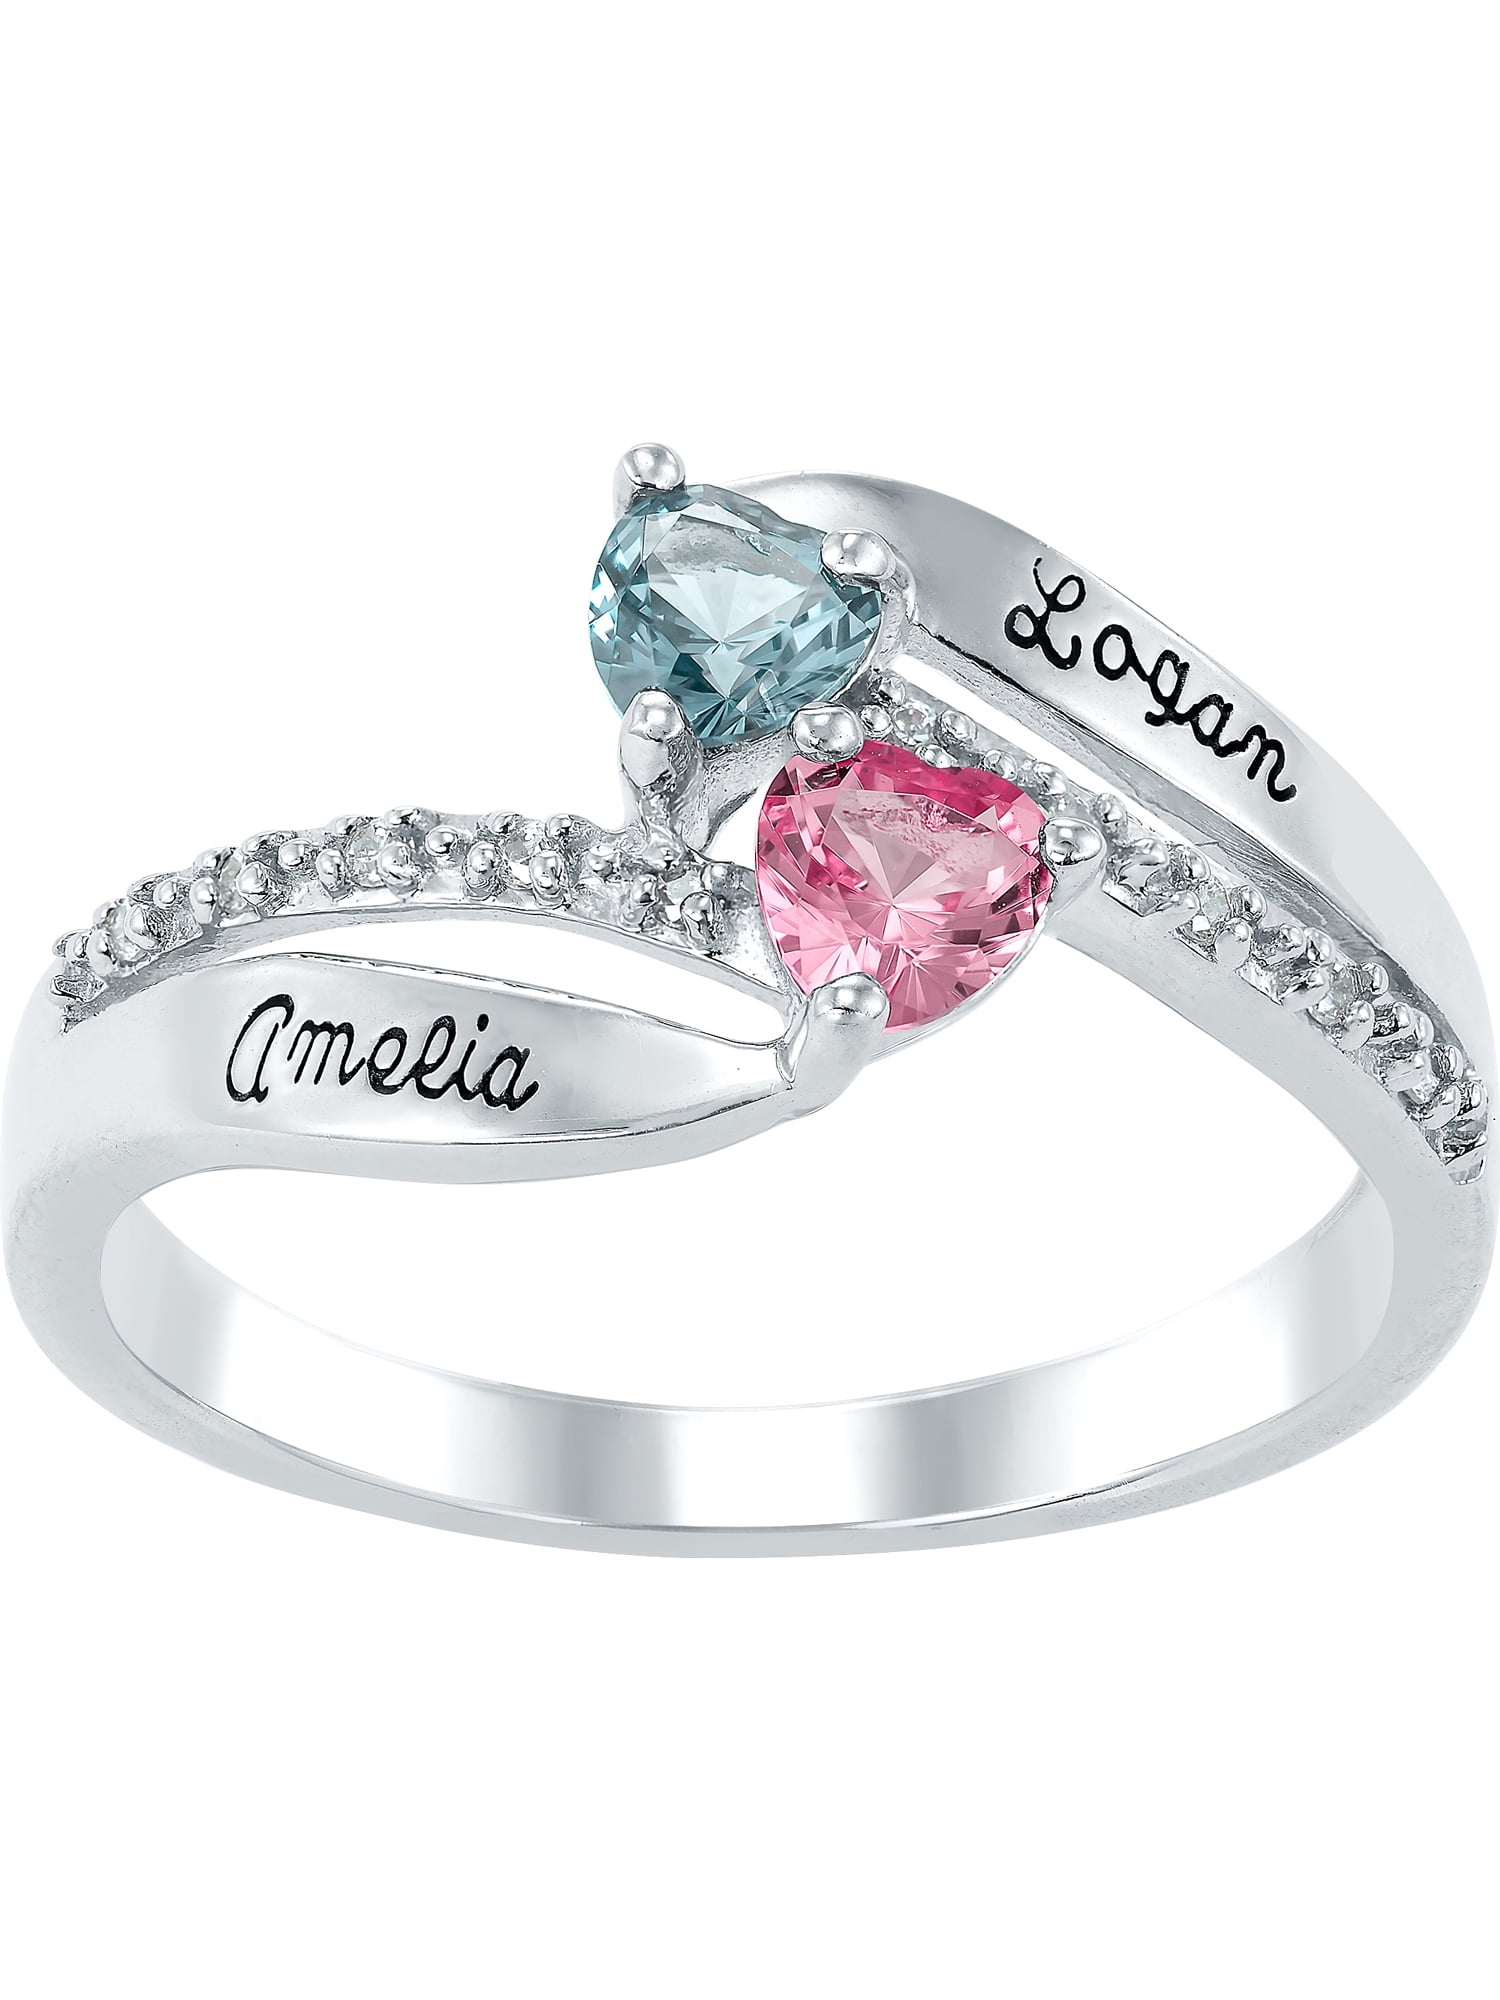 Personalized Family Jewelry ? Birthstone Women's Ettie Mother's Ring ...